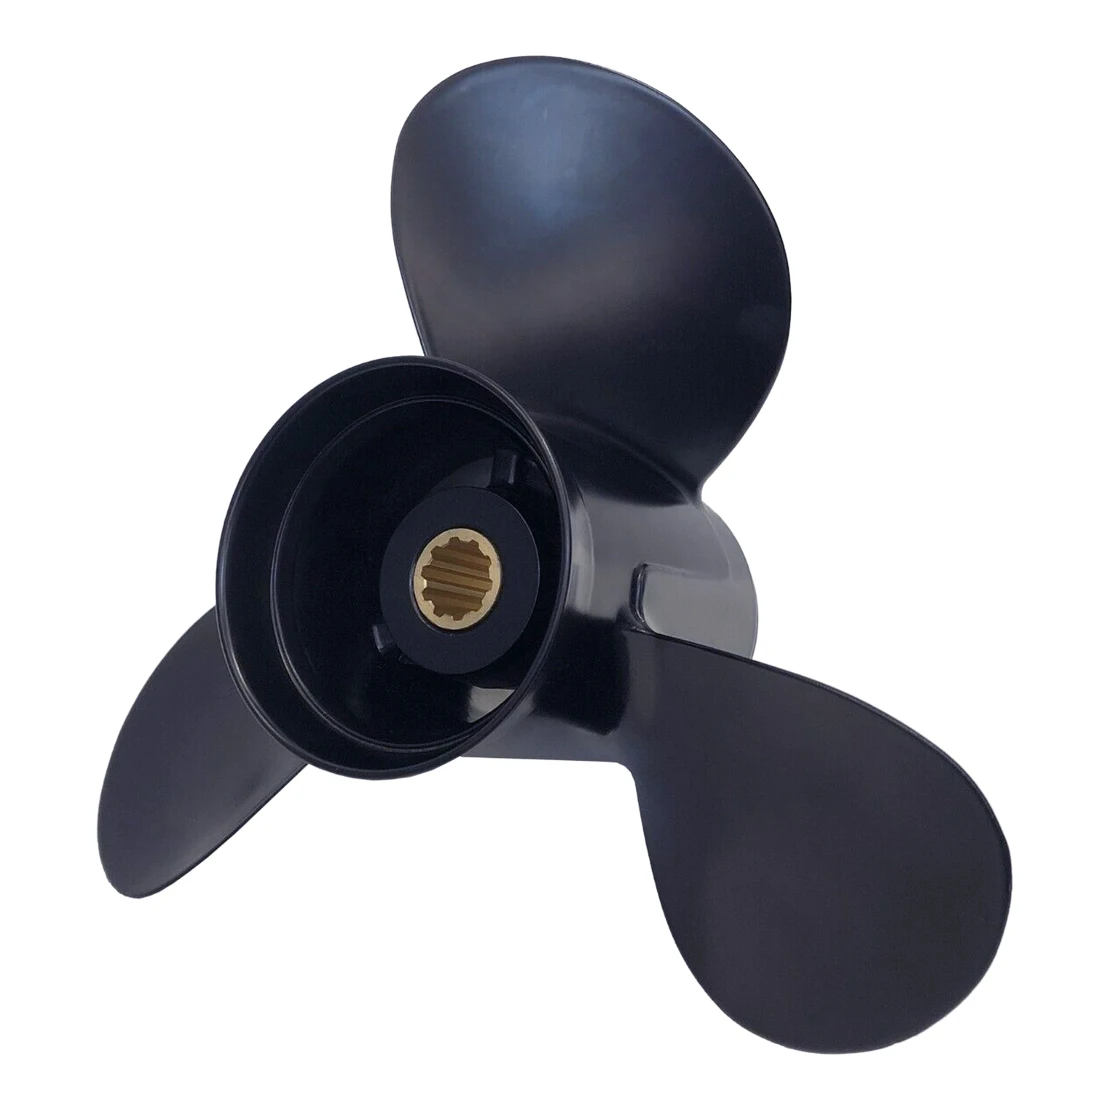 Boat Propeller 48-19640A40 346-64104-5 3R0B645270 Fit for Mercury Mariner Tohatsu Nissan Outboard 25-30HP Black Aluminum Alloy